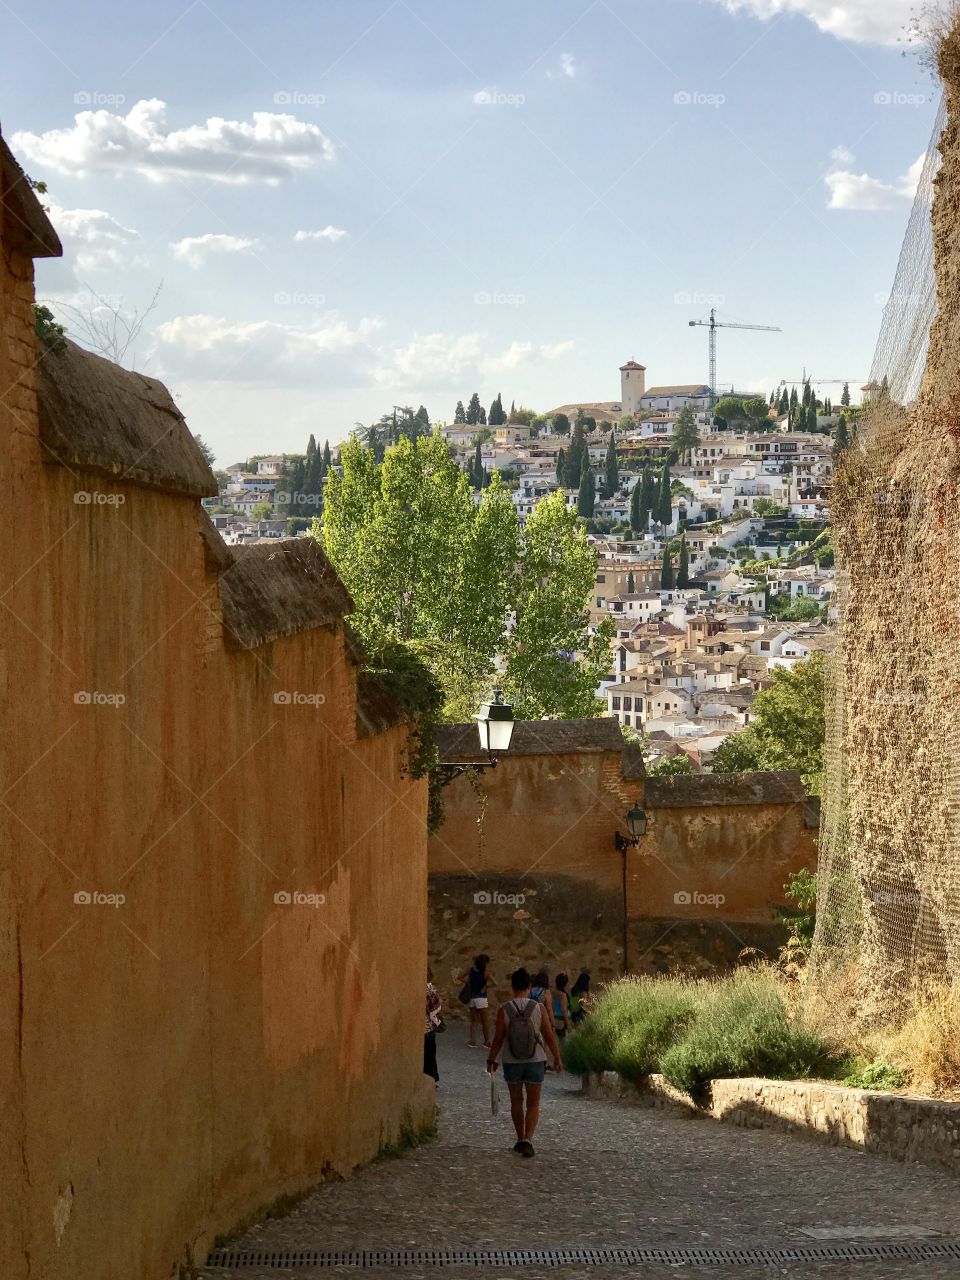 On the path down the hill, from the Palace at Alhambra, overlooks the old town of Granada, the stuff fairytales are made of, still lives here! 🧚🏼‍♀️